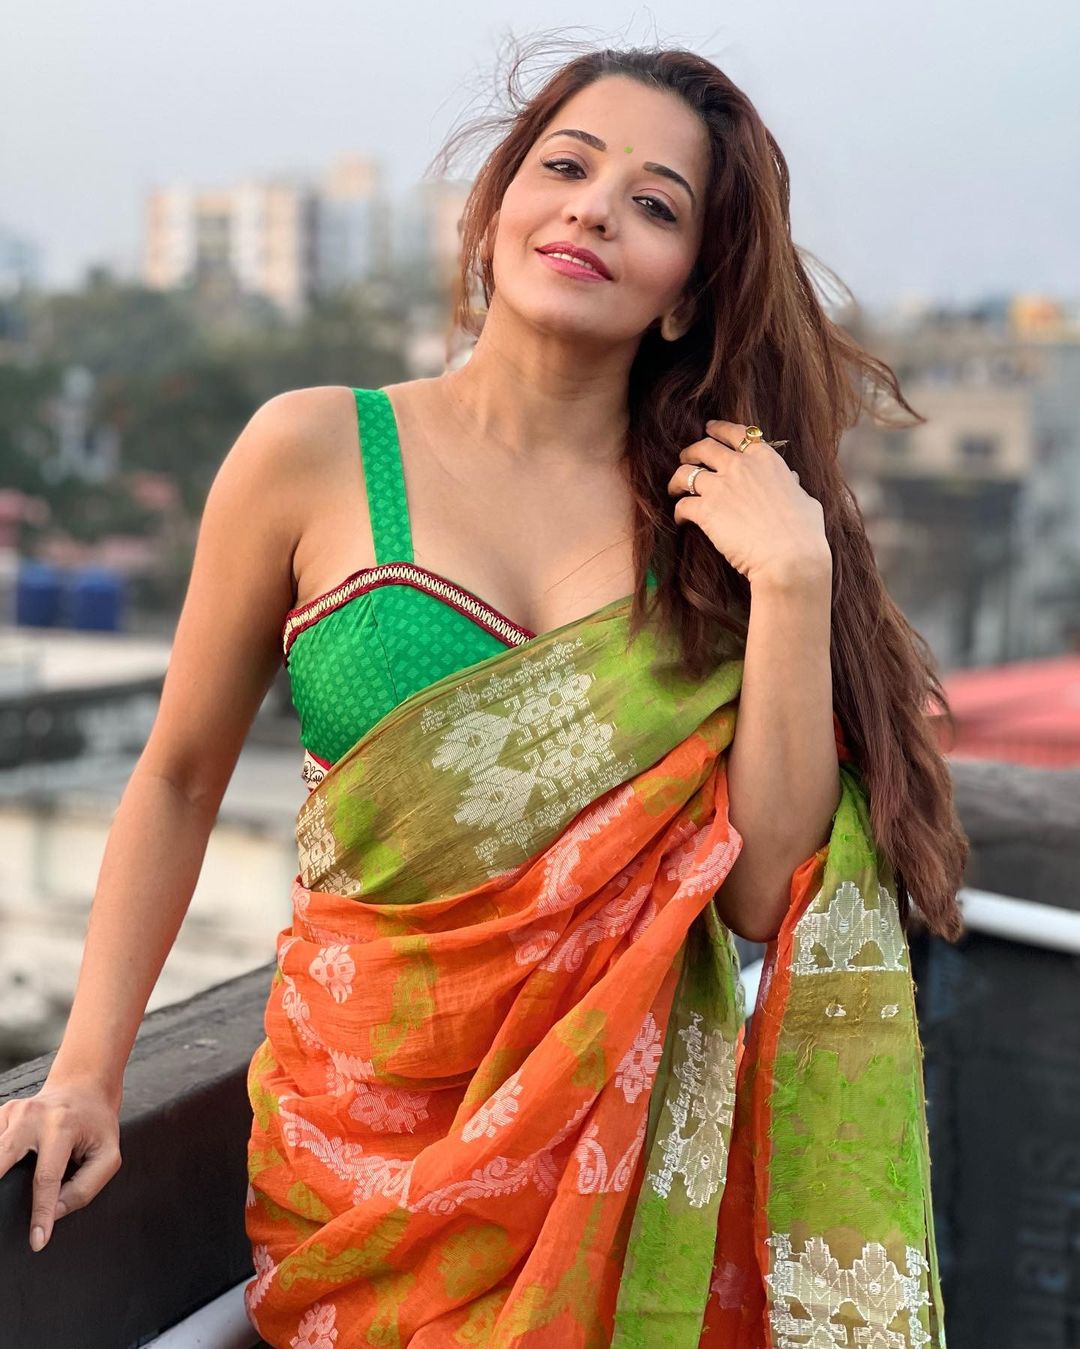 Monalisa looks stunning in the orange saree and sultry blouse